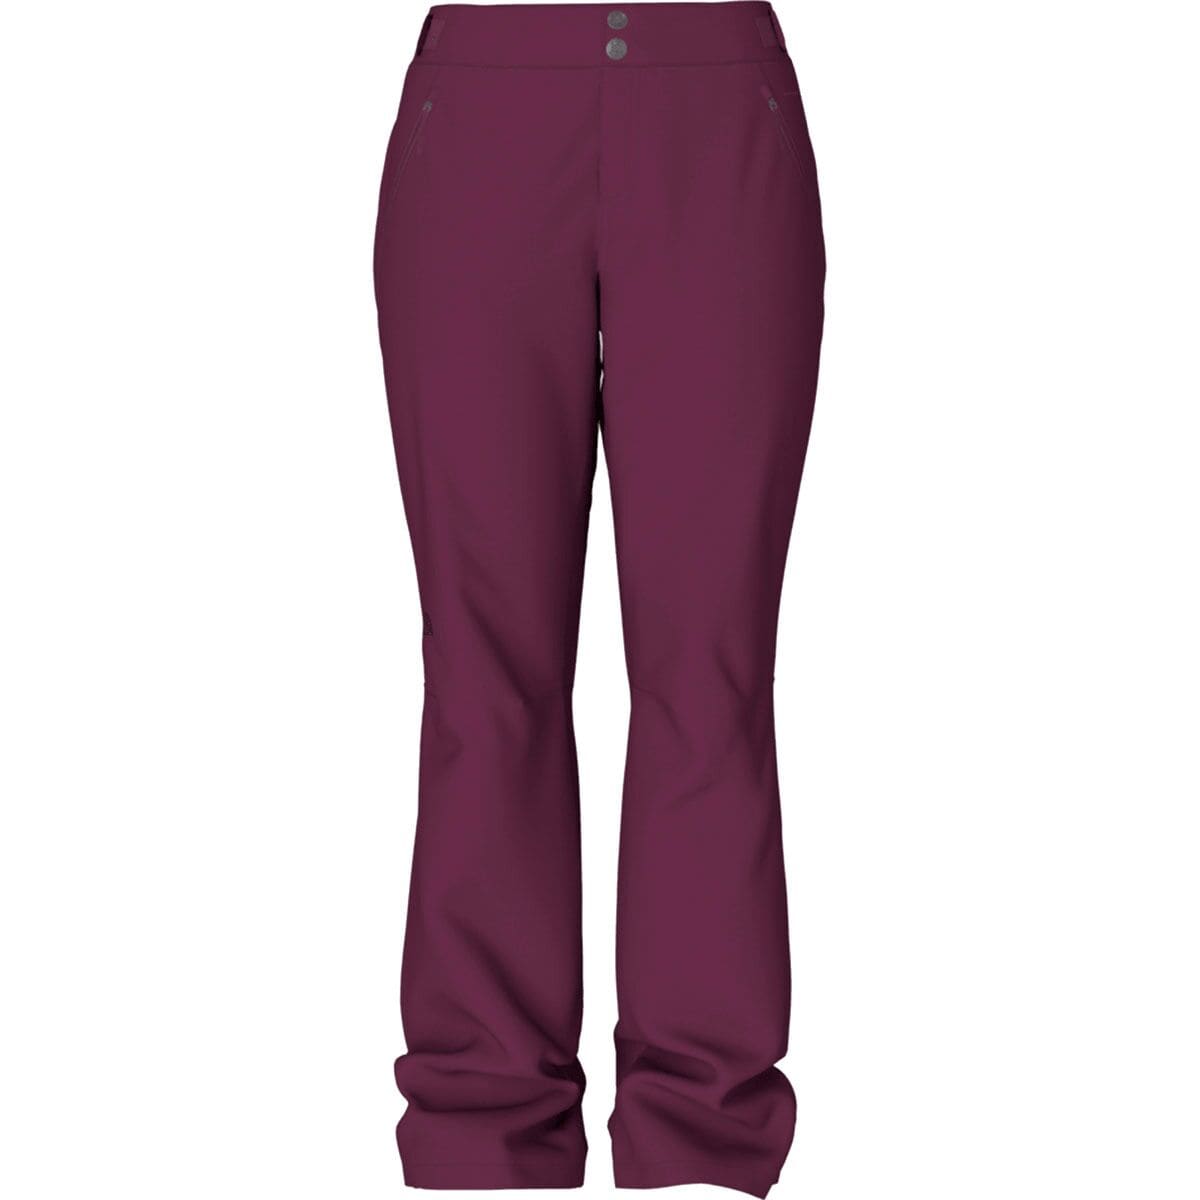 Sally Insulated Pant - Women